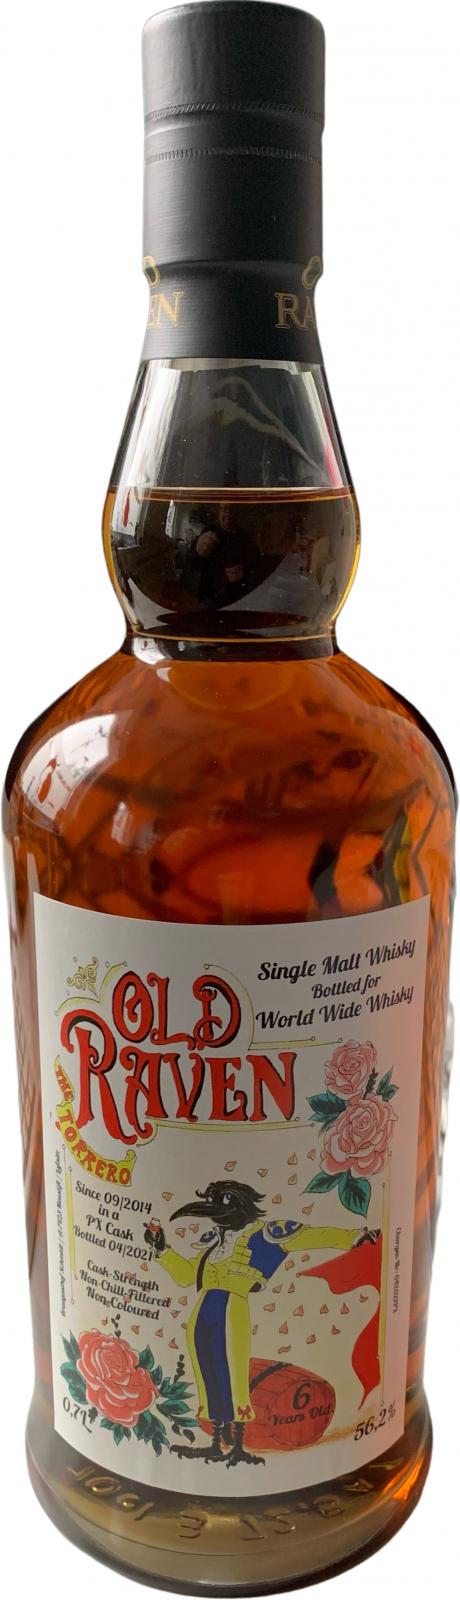 Old Raven 2014 Torrero PX Cask World Wide Whisky 56.2% 700ml